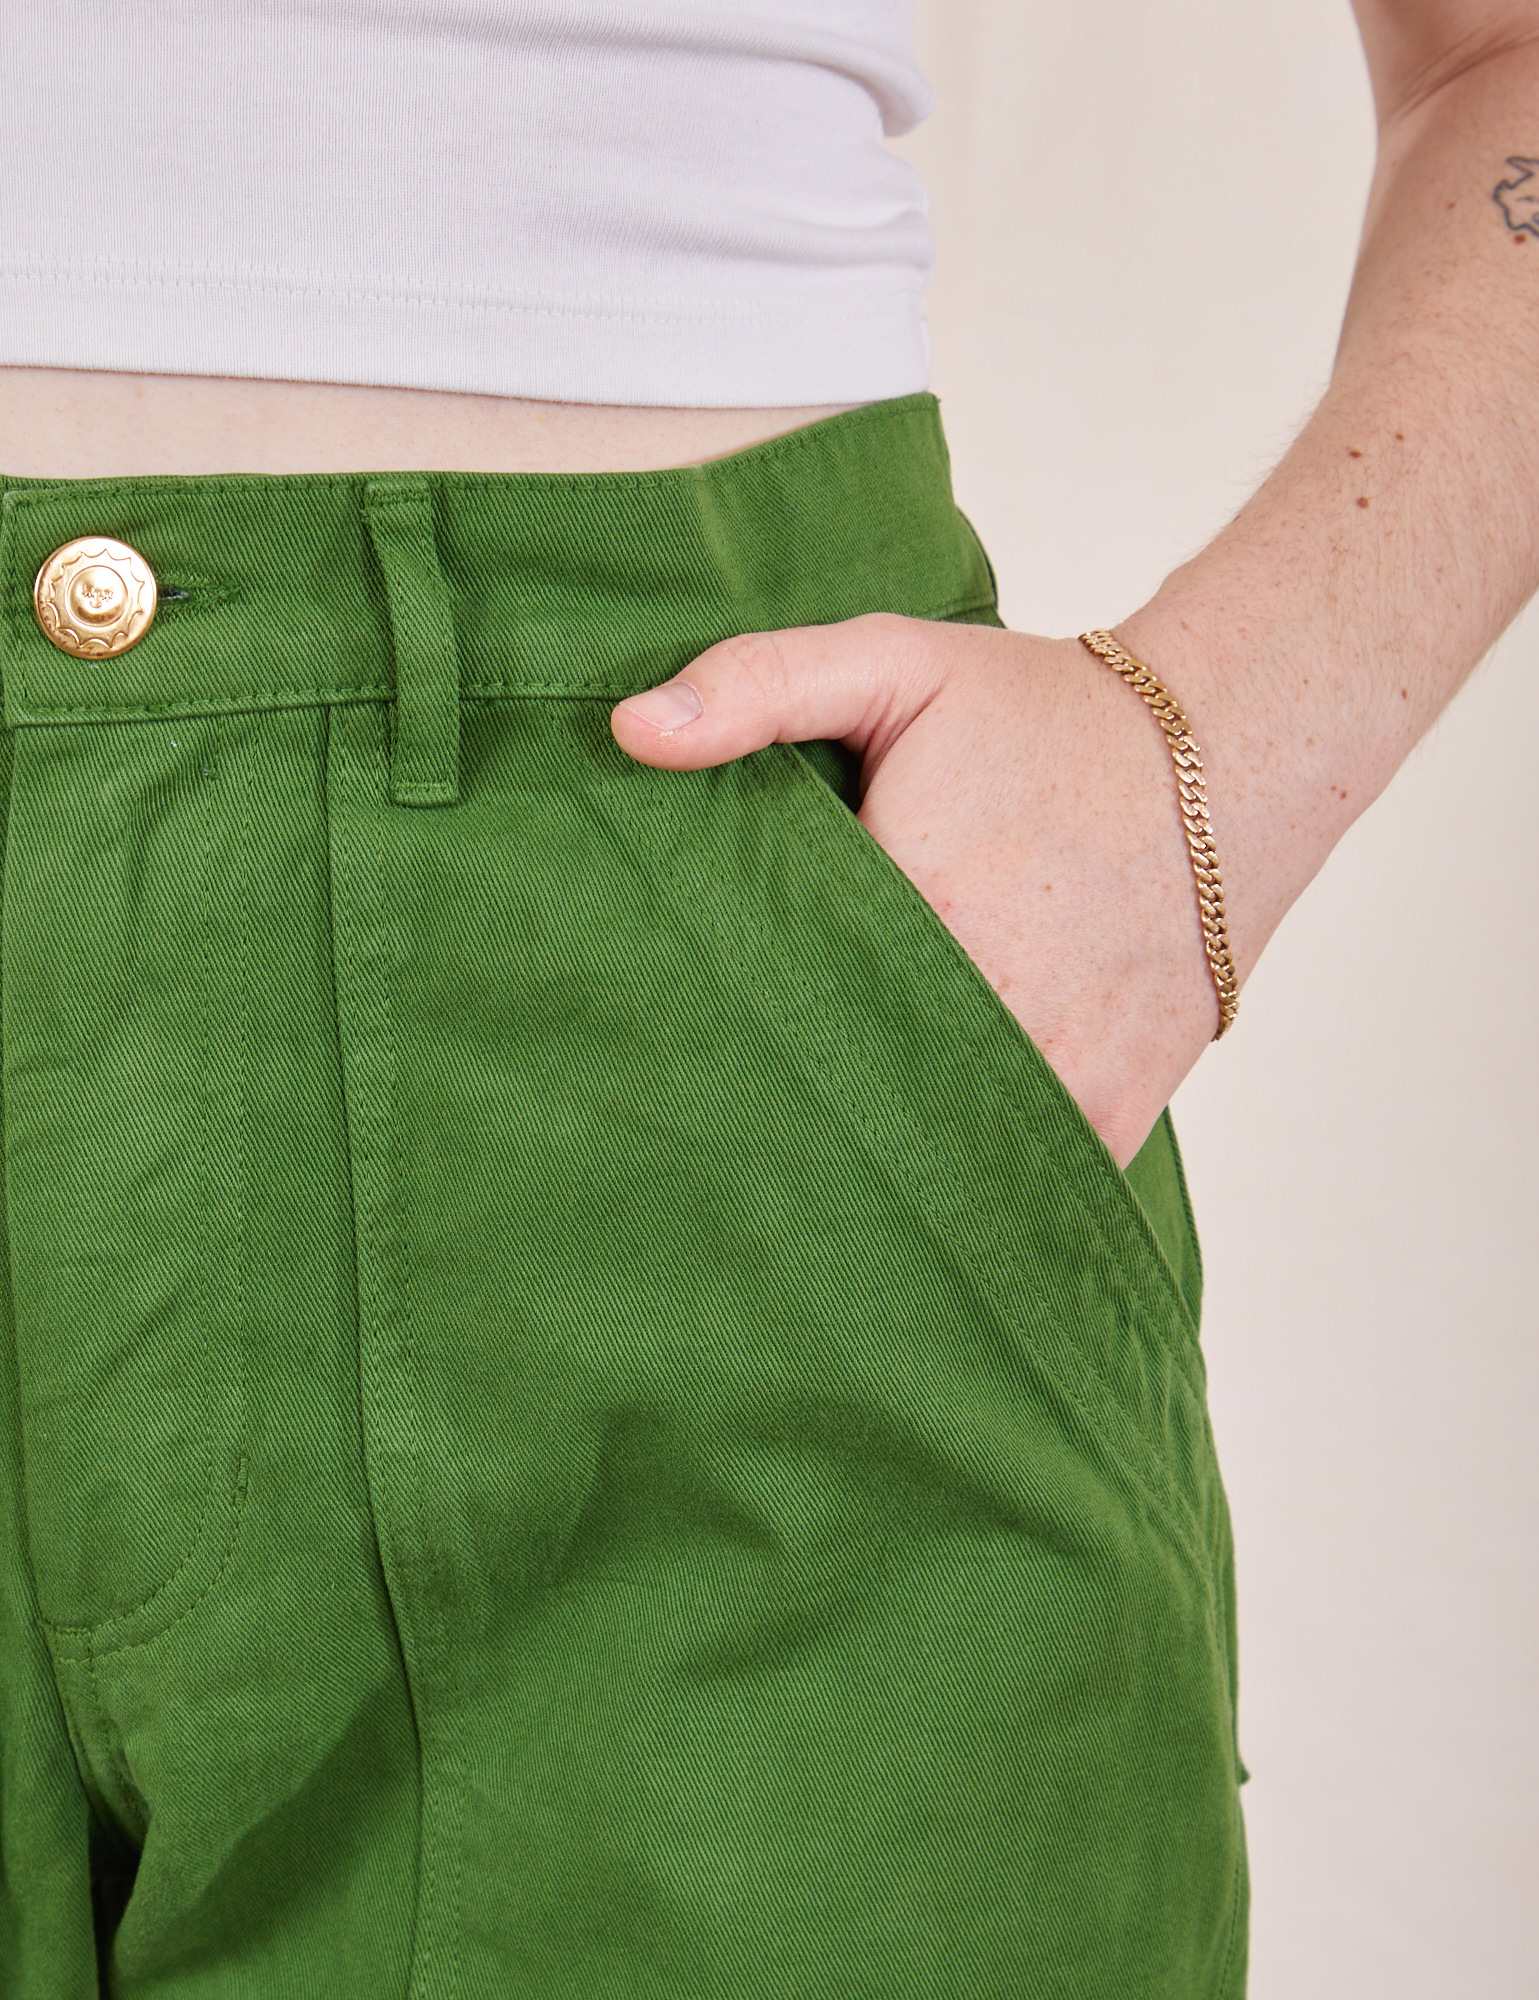 Petite Pencil Pants in Lawn Green front pocket close up. Hana has her hand in the pocket.